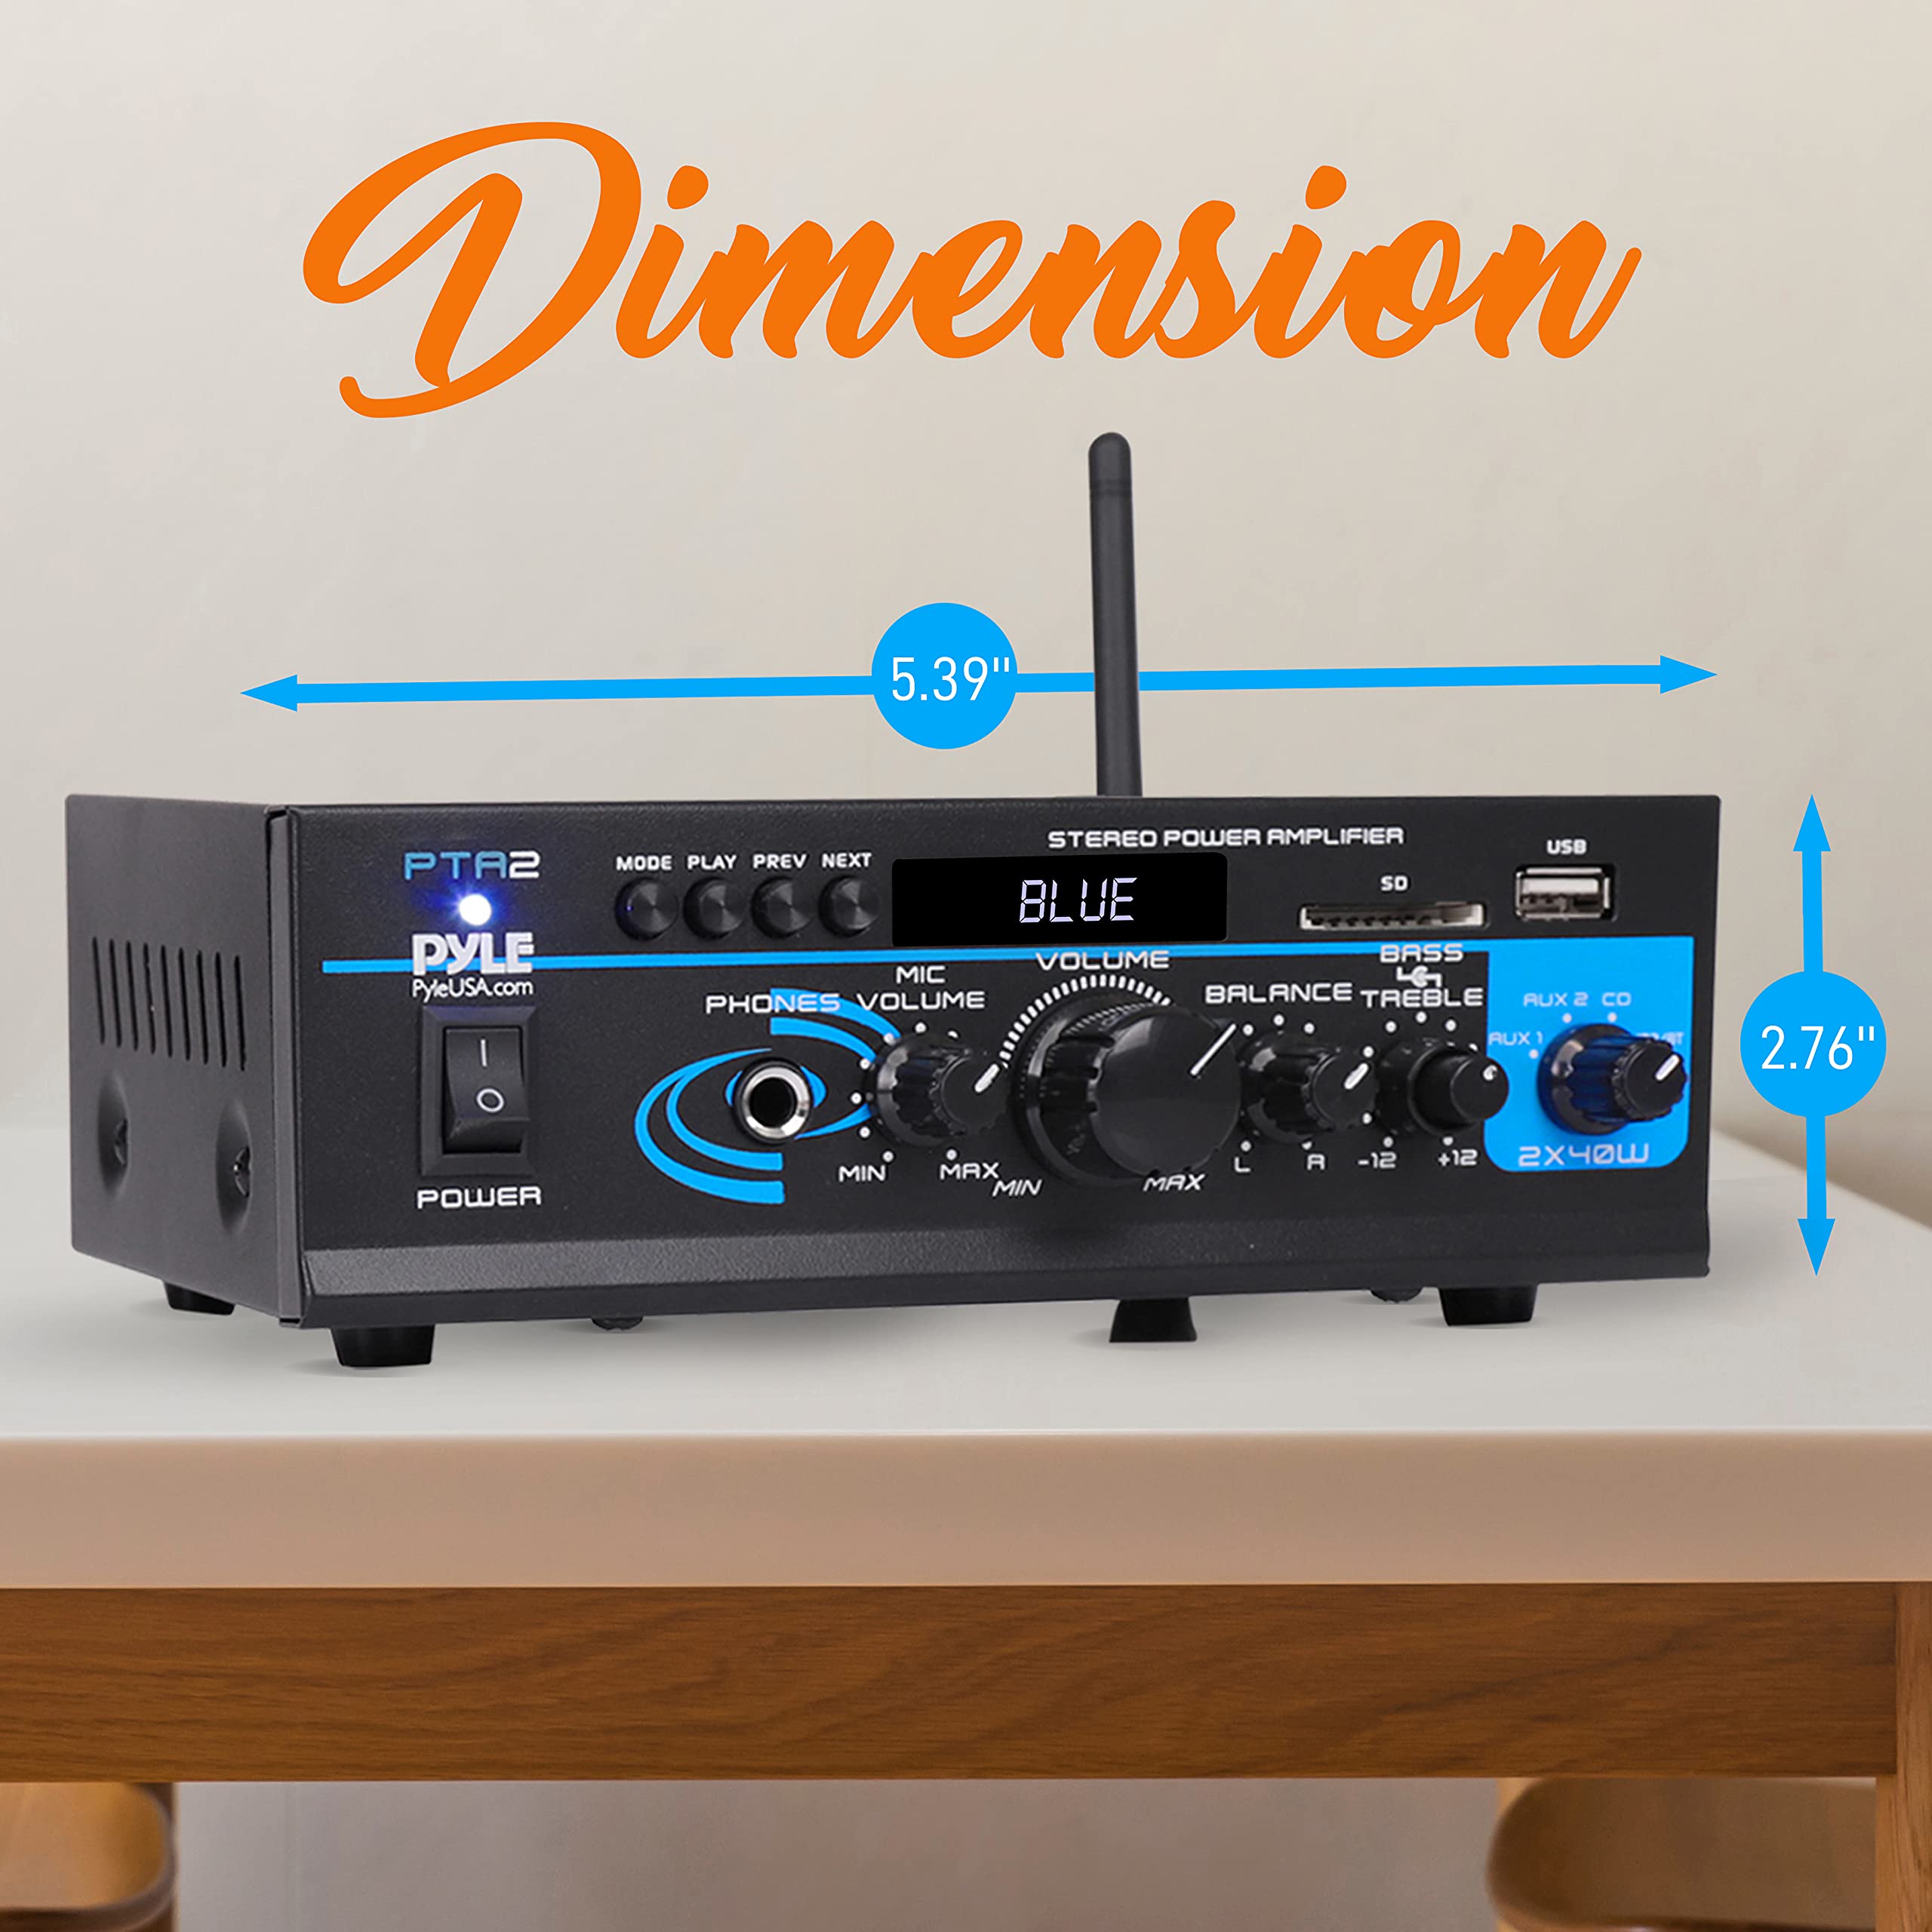 Pyle Home Audio Power Amplifier System - 2X40W Bluetooth Mini Dual Channel Mixer Sound Stereo Receiver Box w/ AUX, Mic Input - For Amplified Speakers, PA, CD Player, Theater via RCA, Studio Use - PTA2